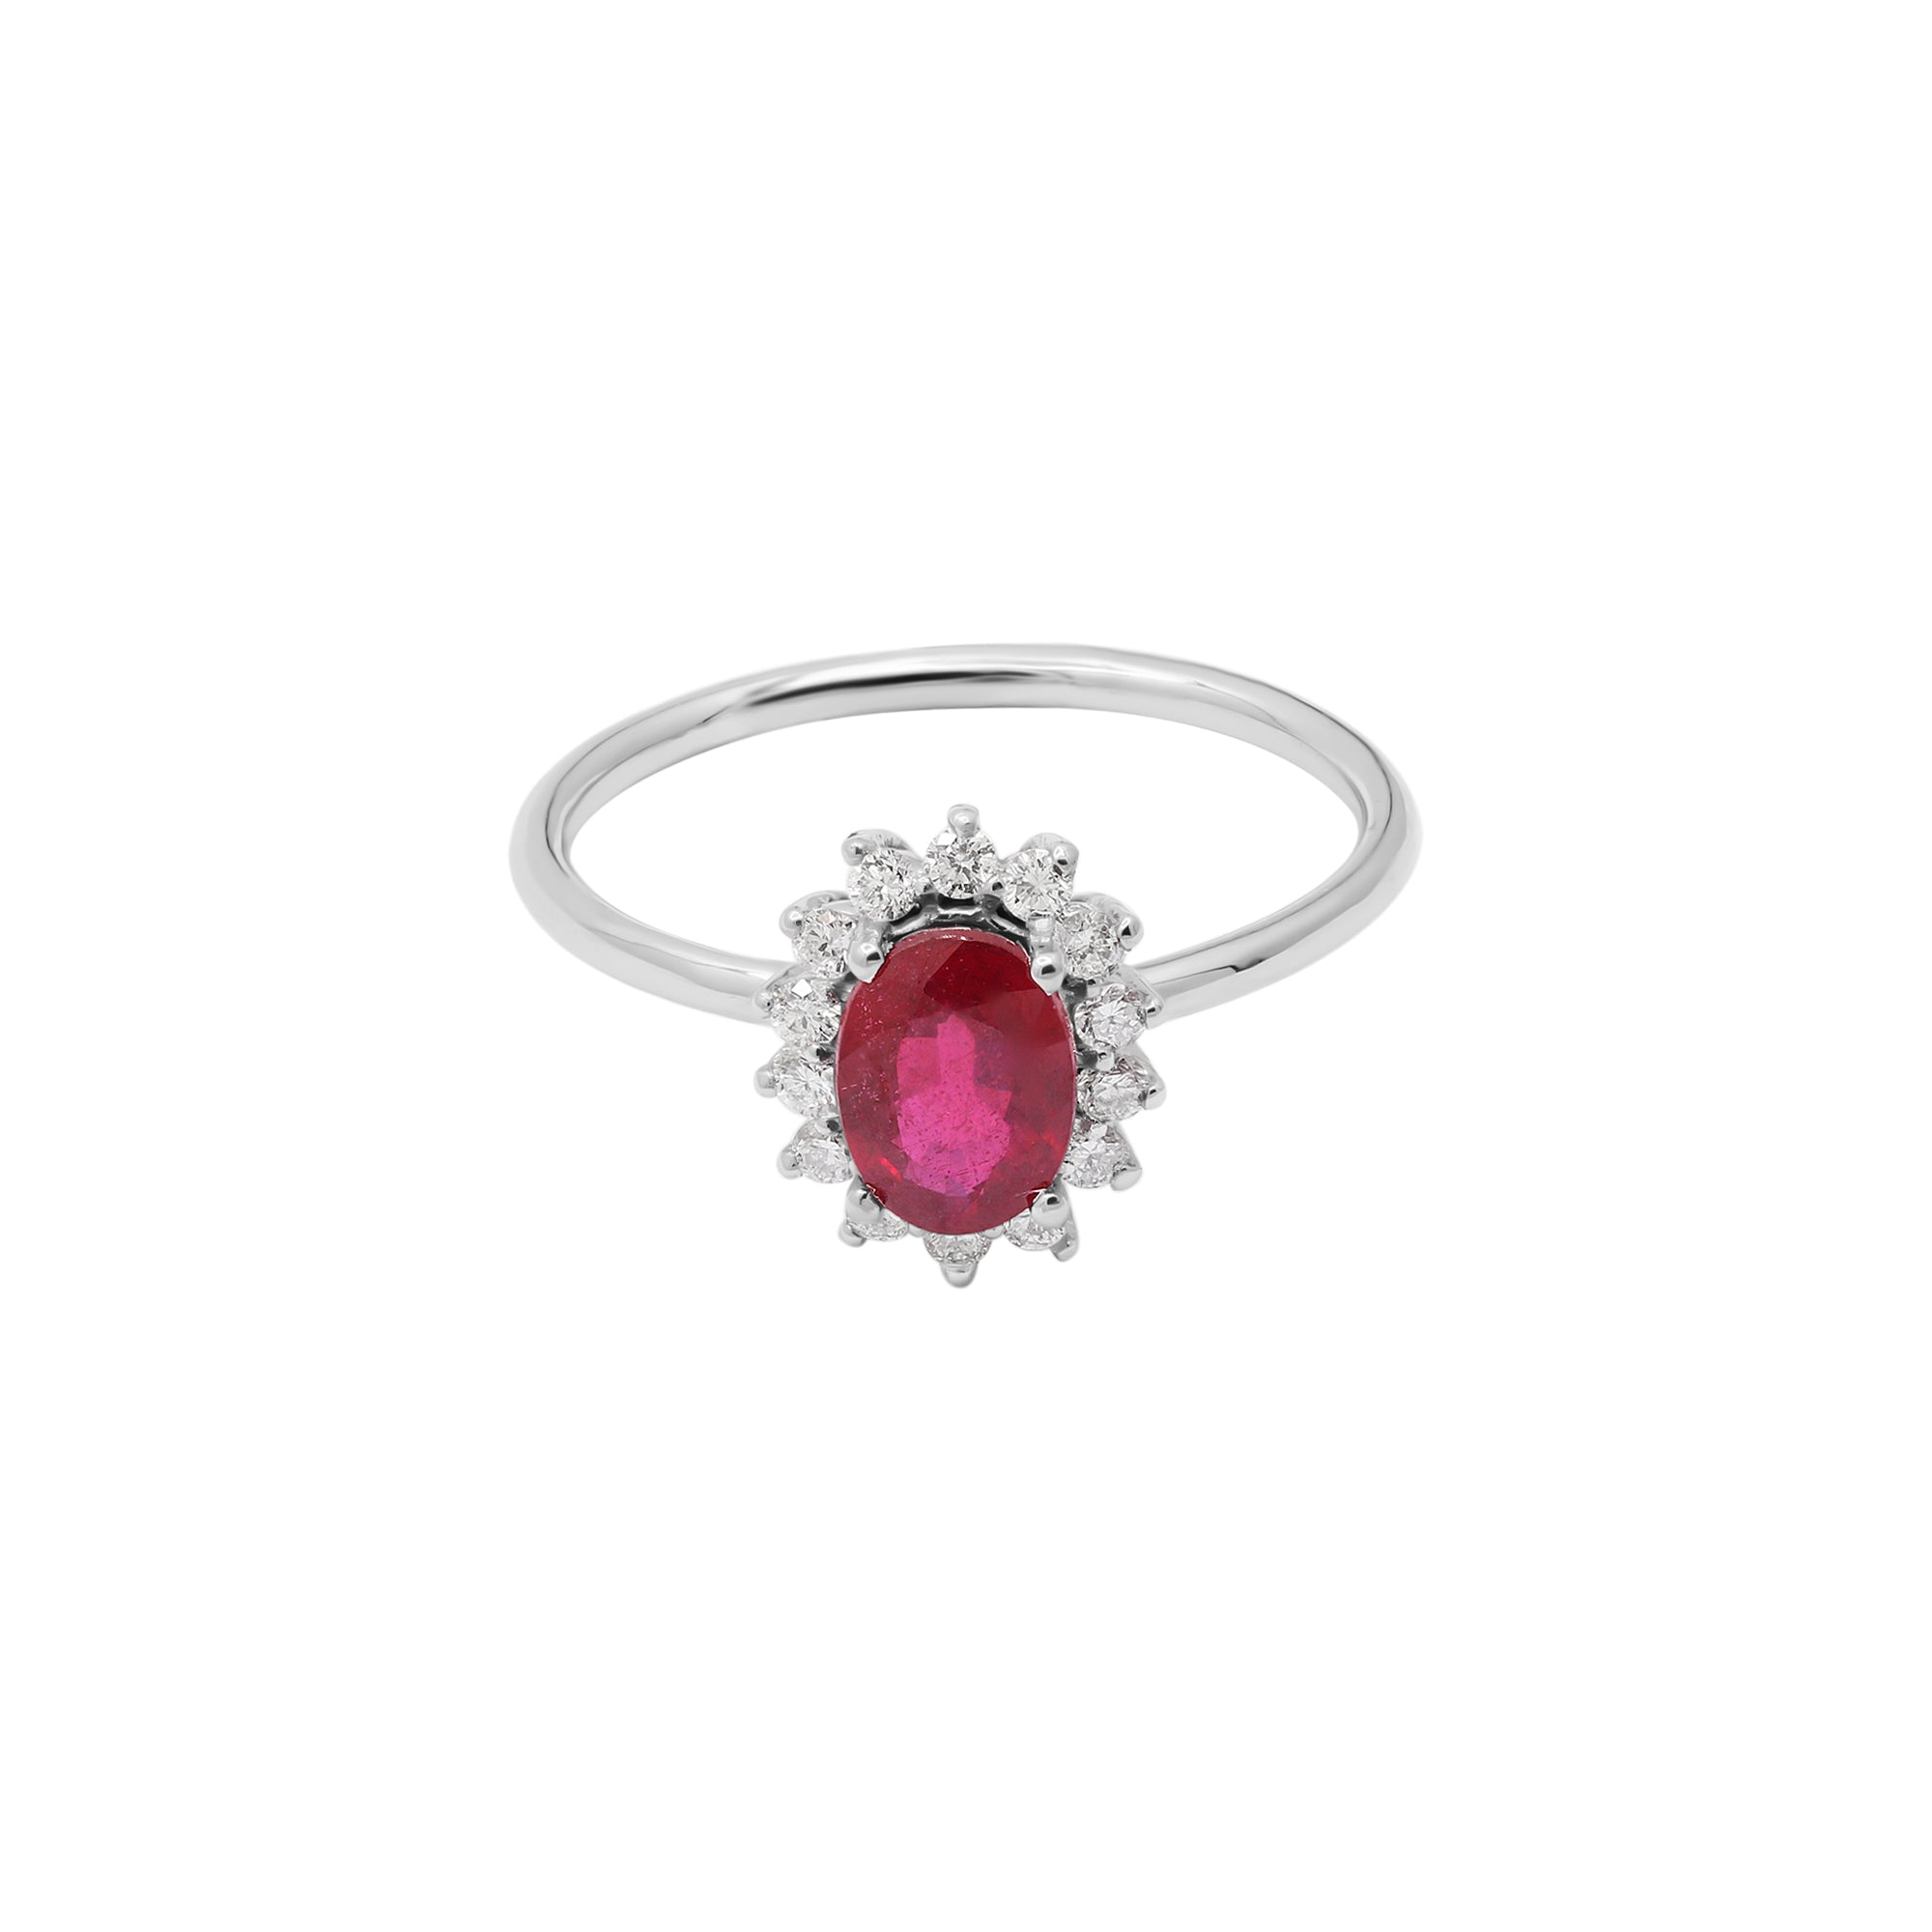 18 kt white gold ring. Made up of a natural ruby, brilli… | Drouot.com